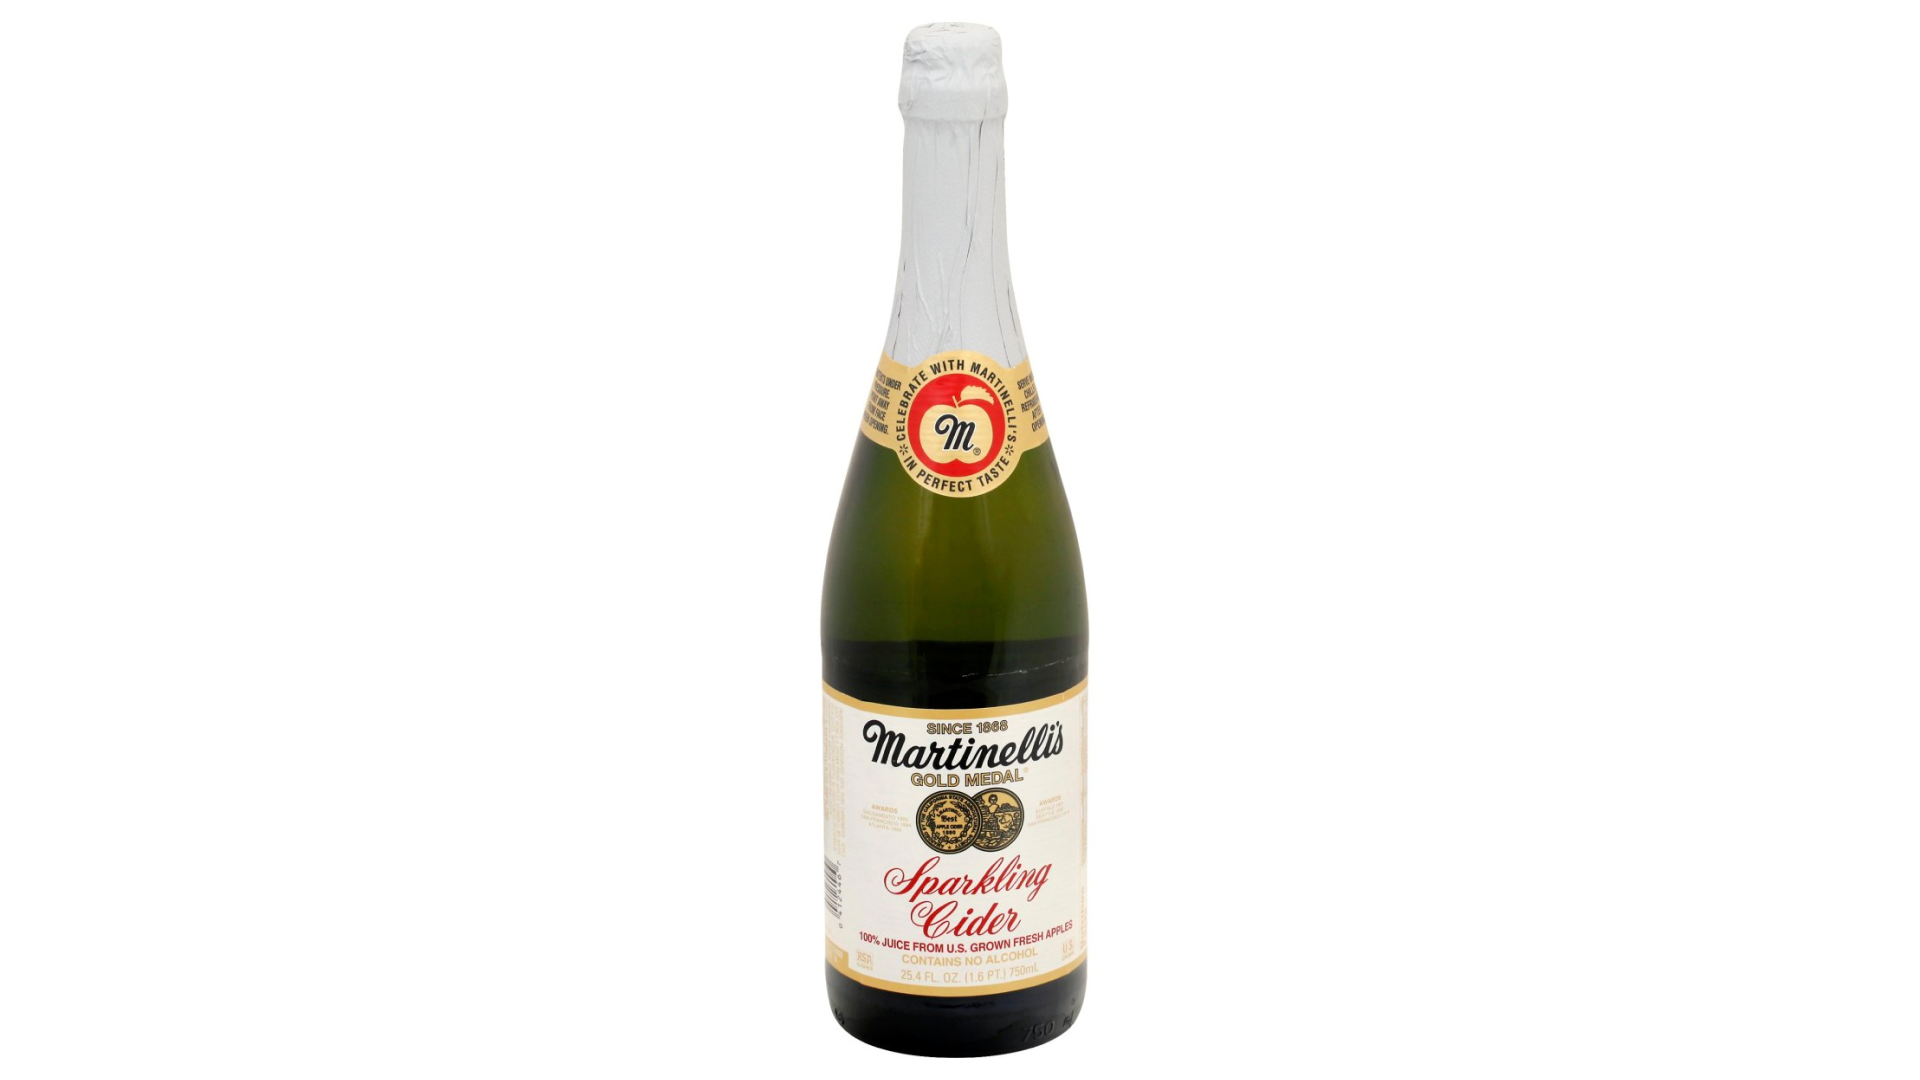 A bottle of Martinelli's alcohol-free sparkling cider